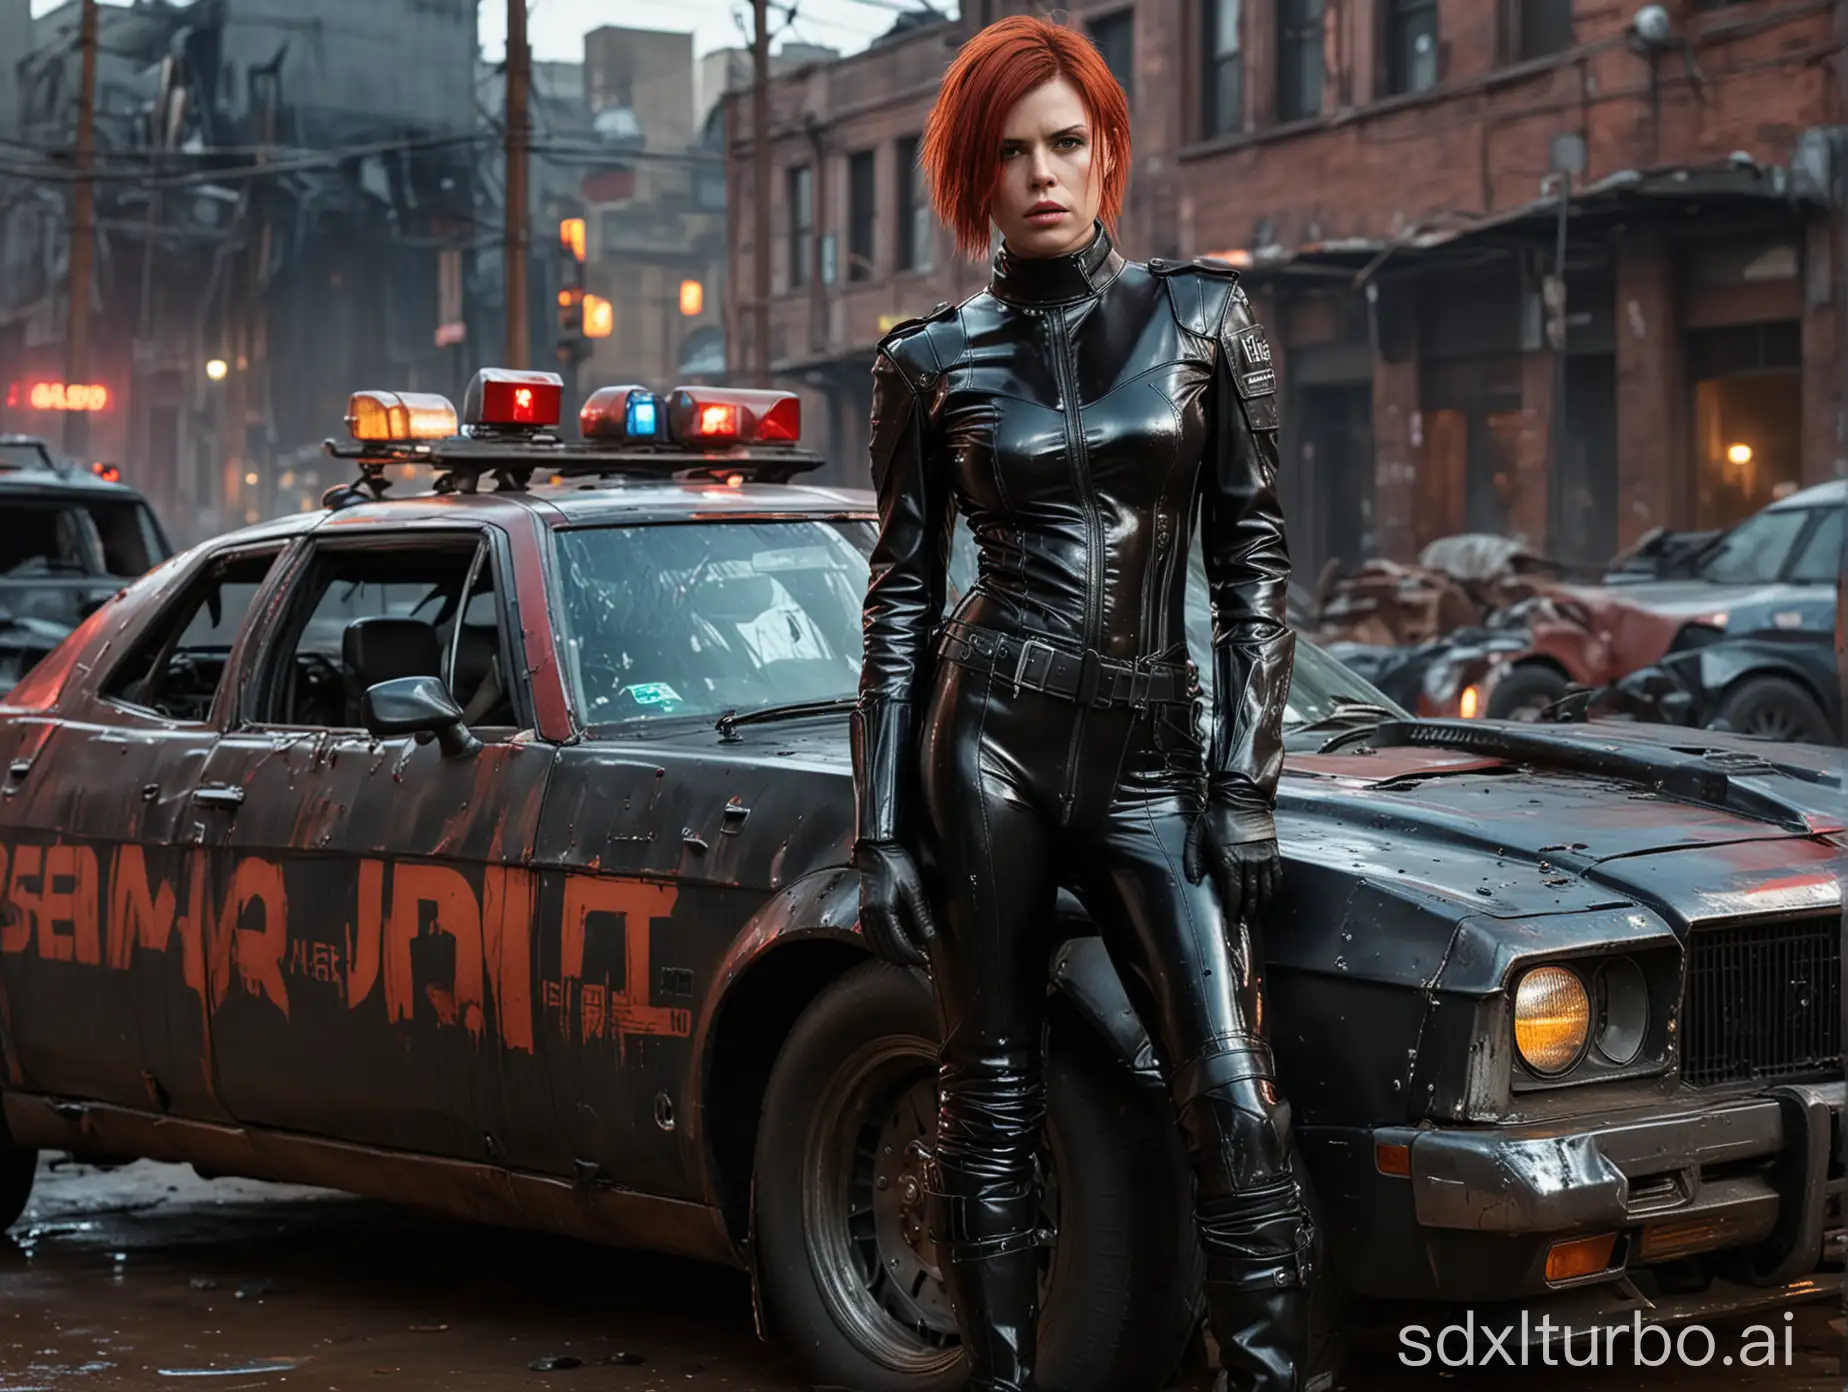 Cyberpunk-Police-Officer-Clea-Duvall-in-Shiny-PVC-Suit-by-Mad-Max-Car